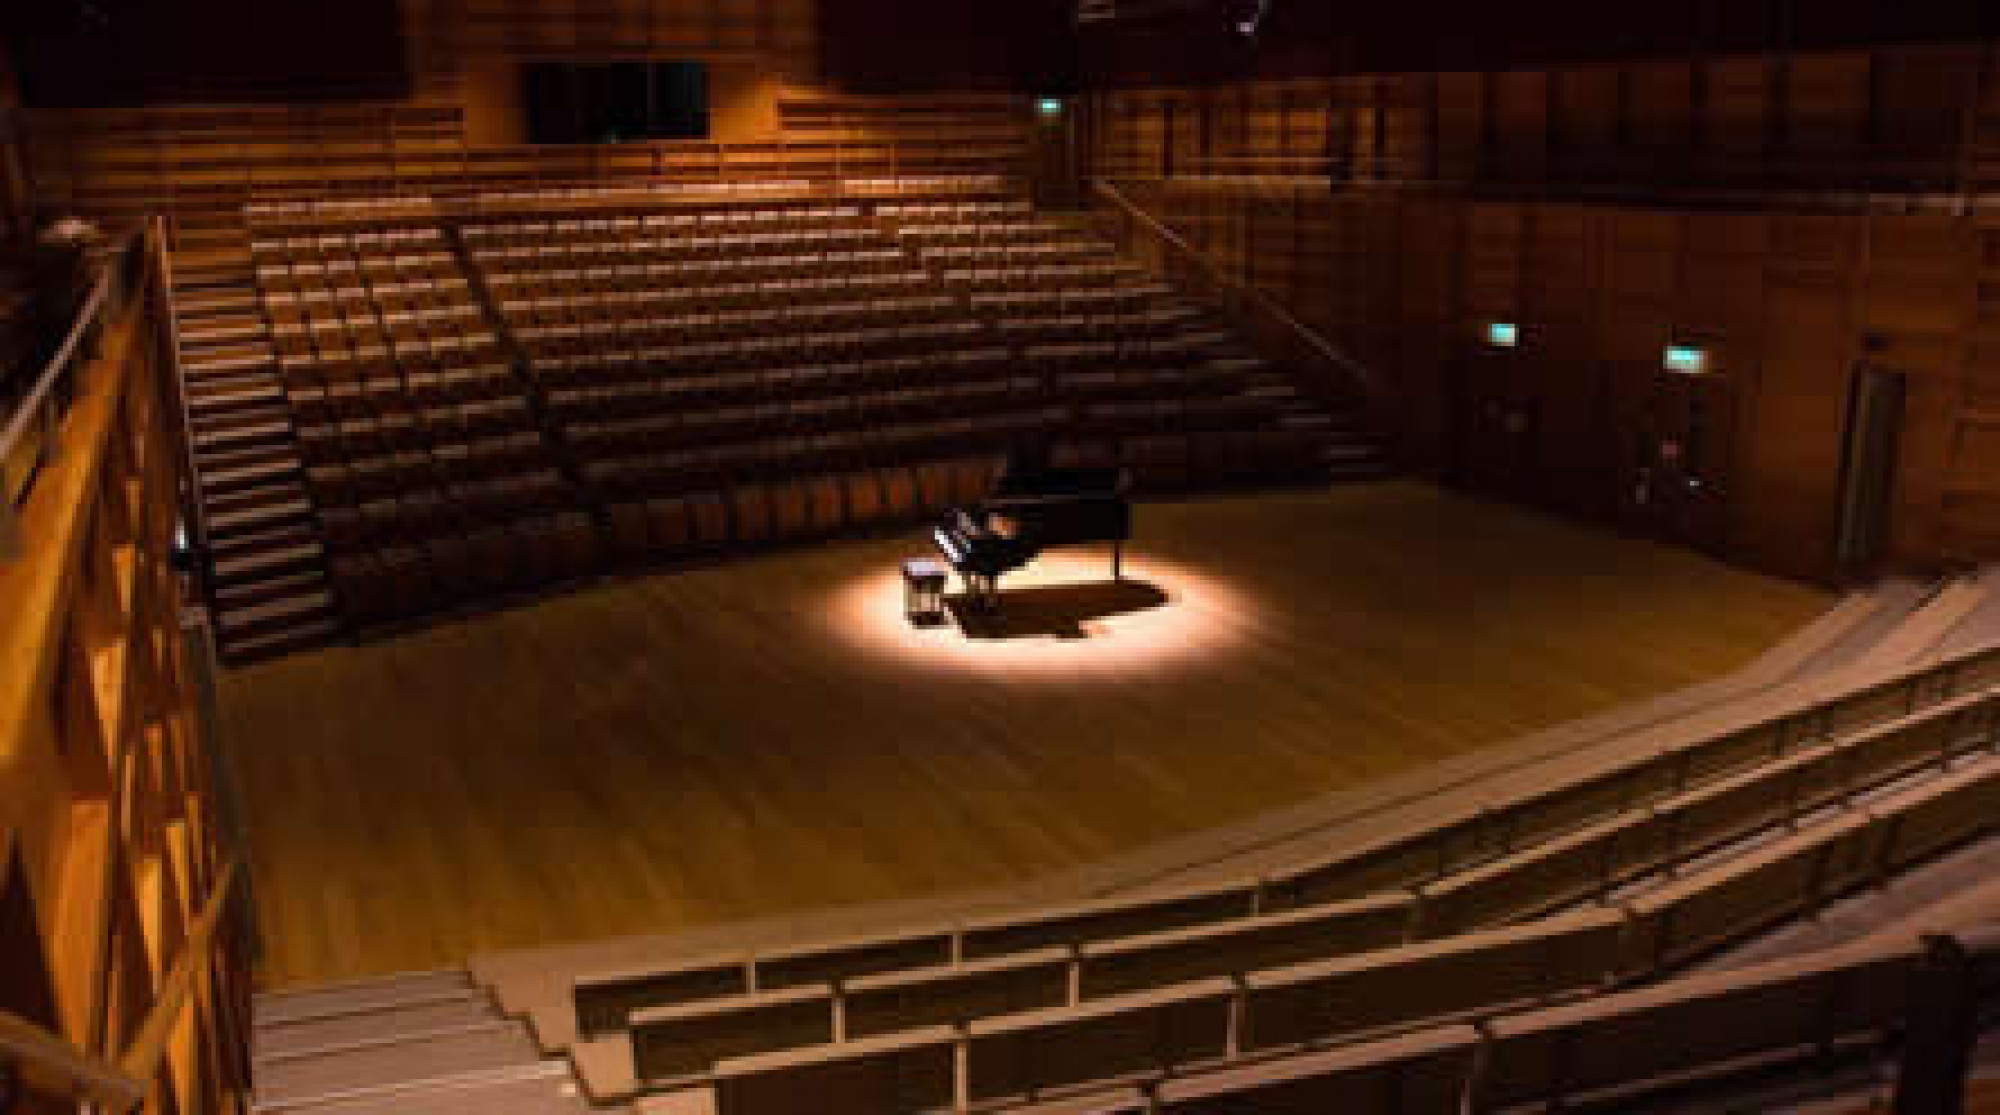 Spotlight on a piano in the Colyer-Fergusson Concert Hall. Image: Molly Hollman